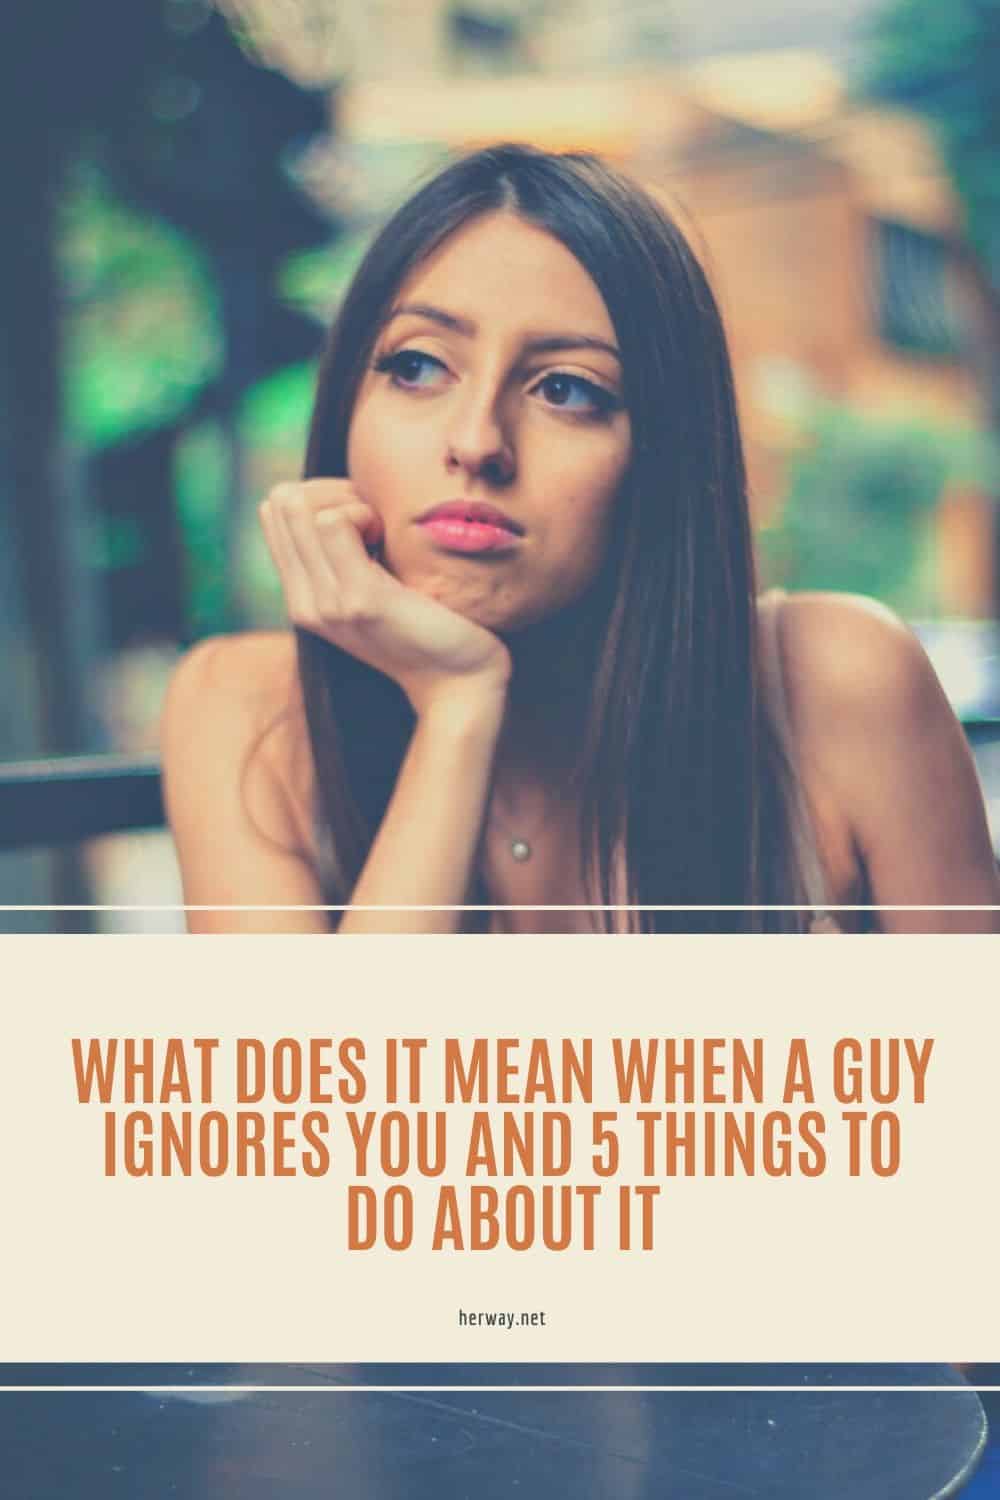 What Does It Mean When A Guy Ignores You And 5 Things To Do About It